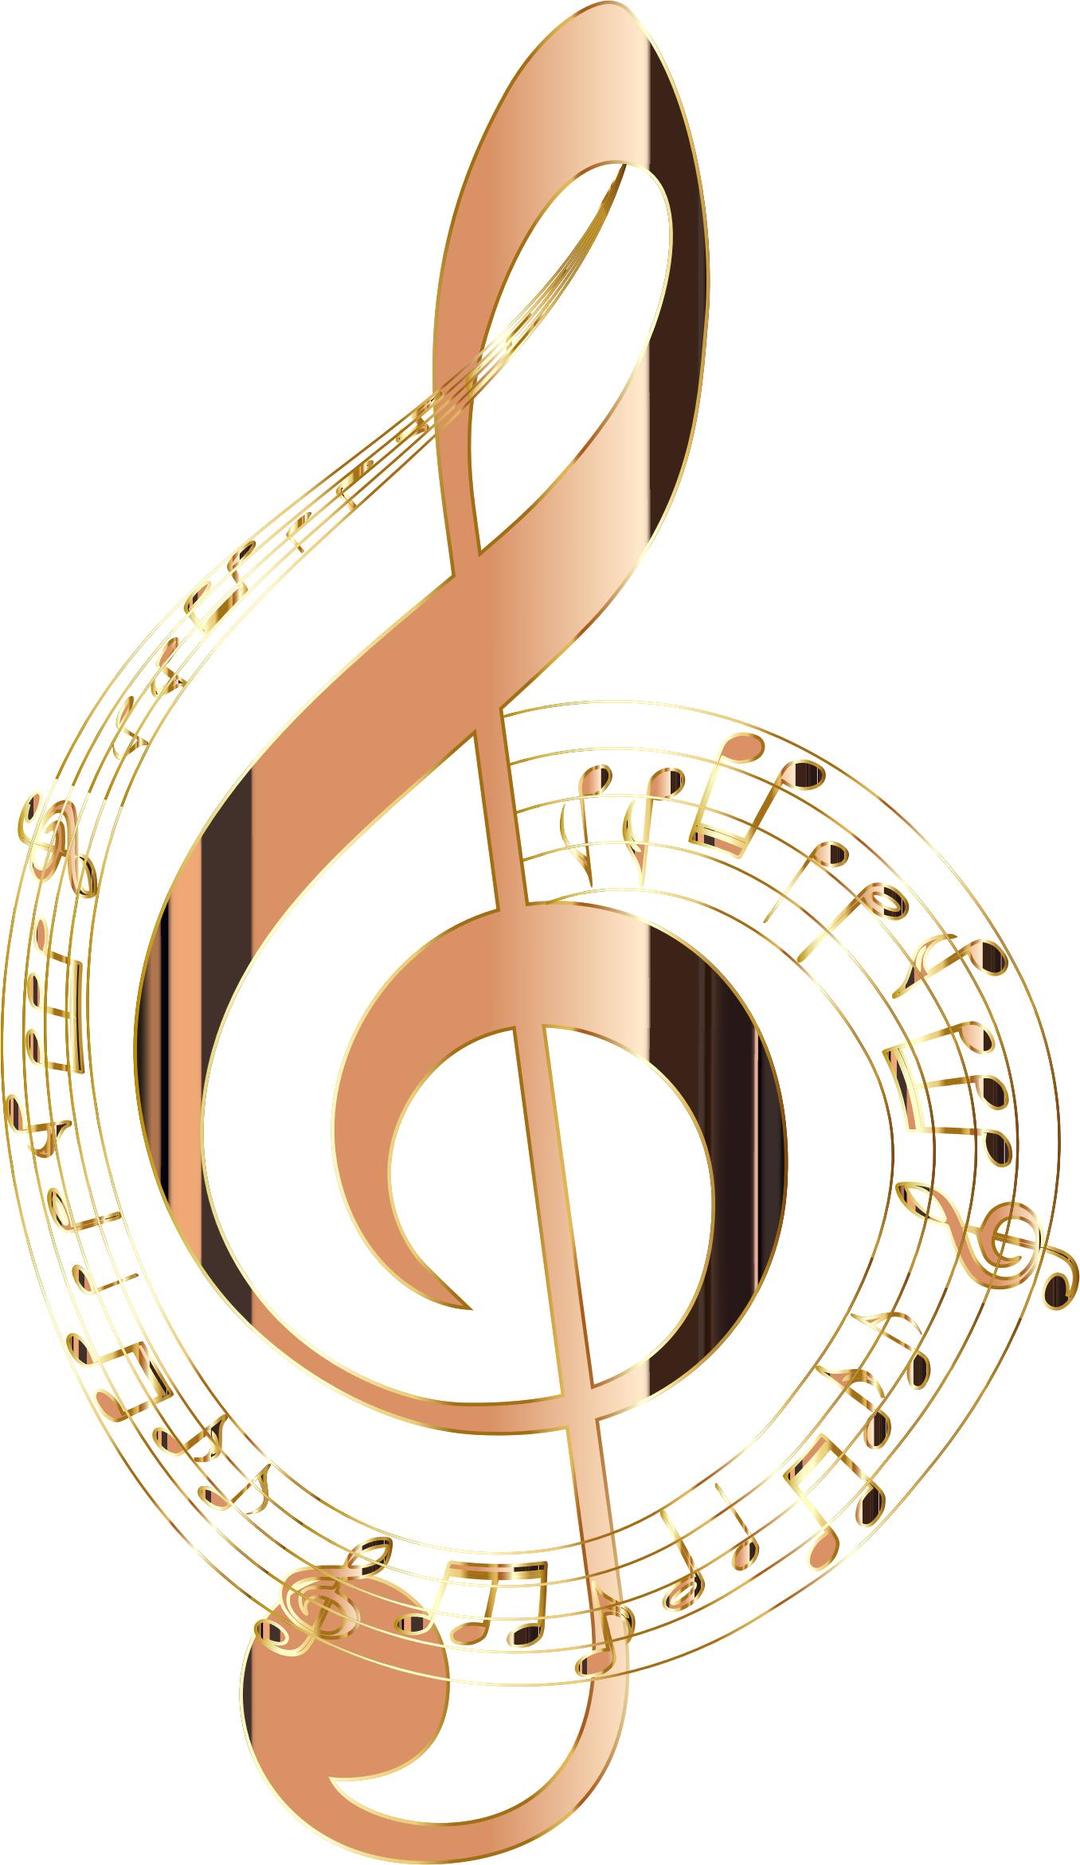 Shiny Copper Musical Notes Typography No Background png transparent